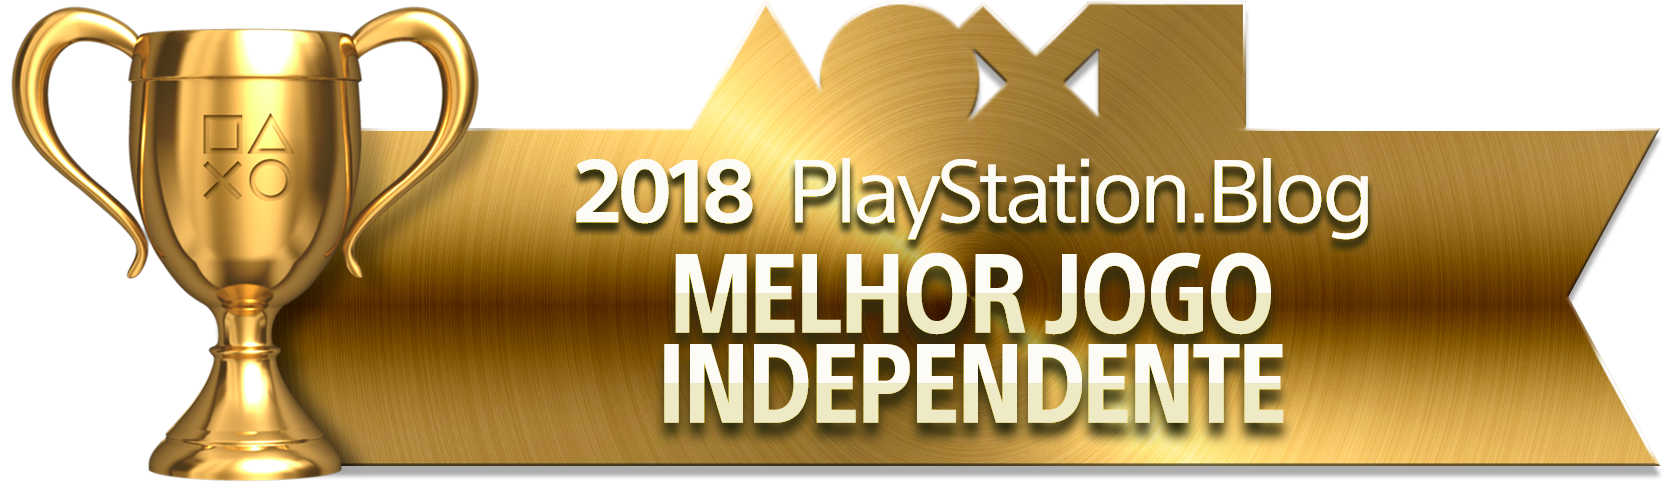 Best Independent Game - Gold